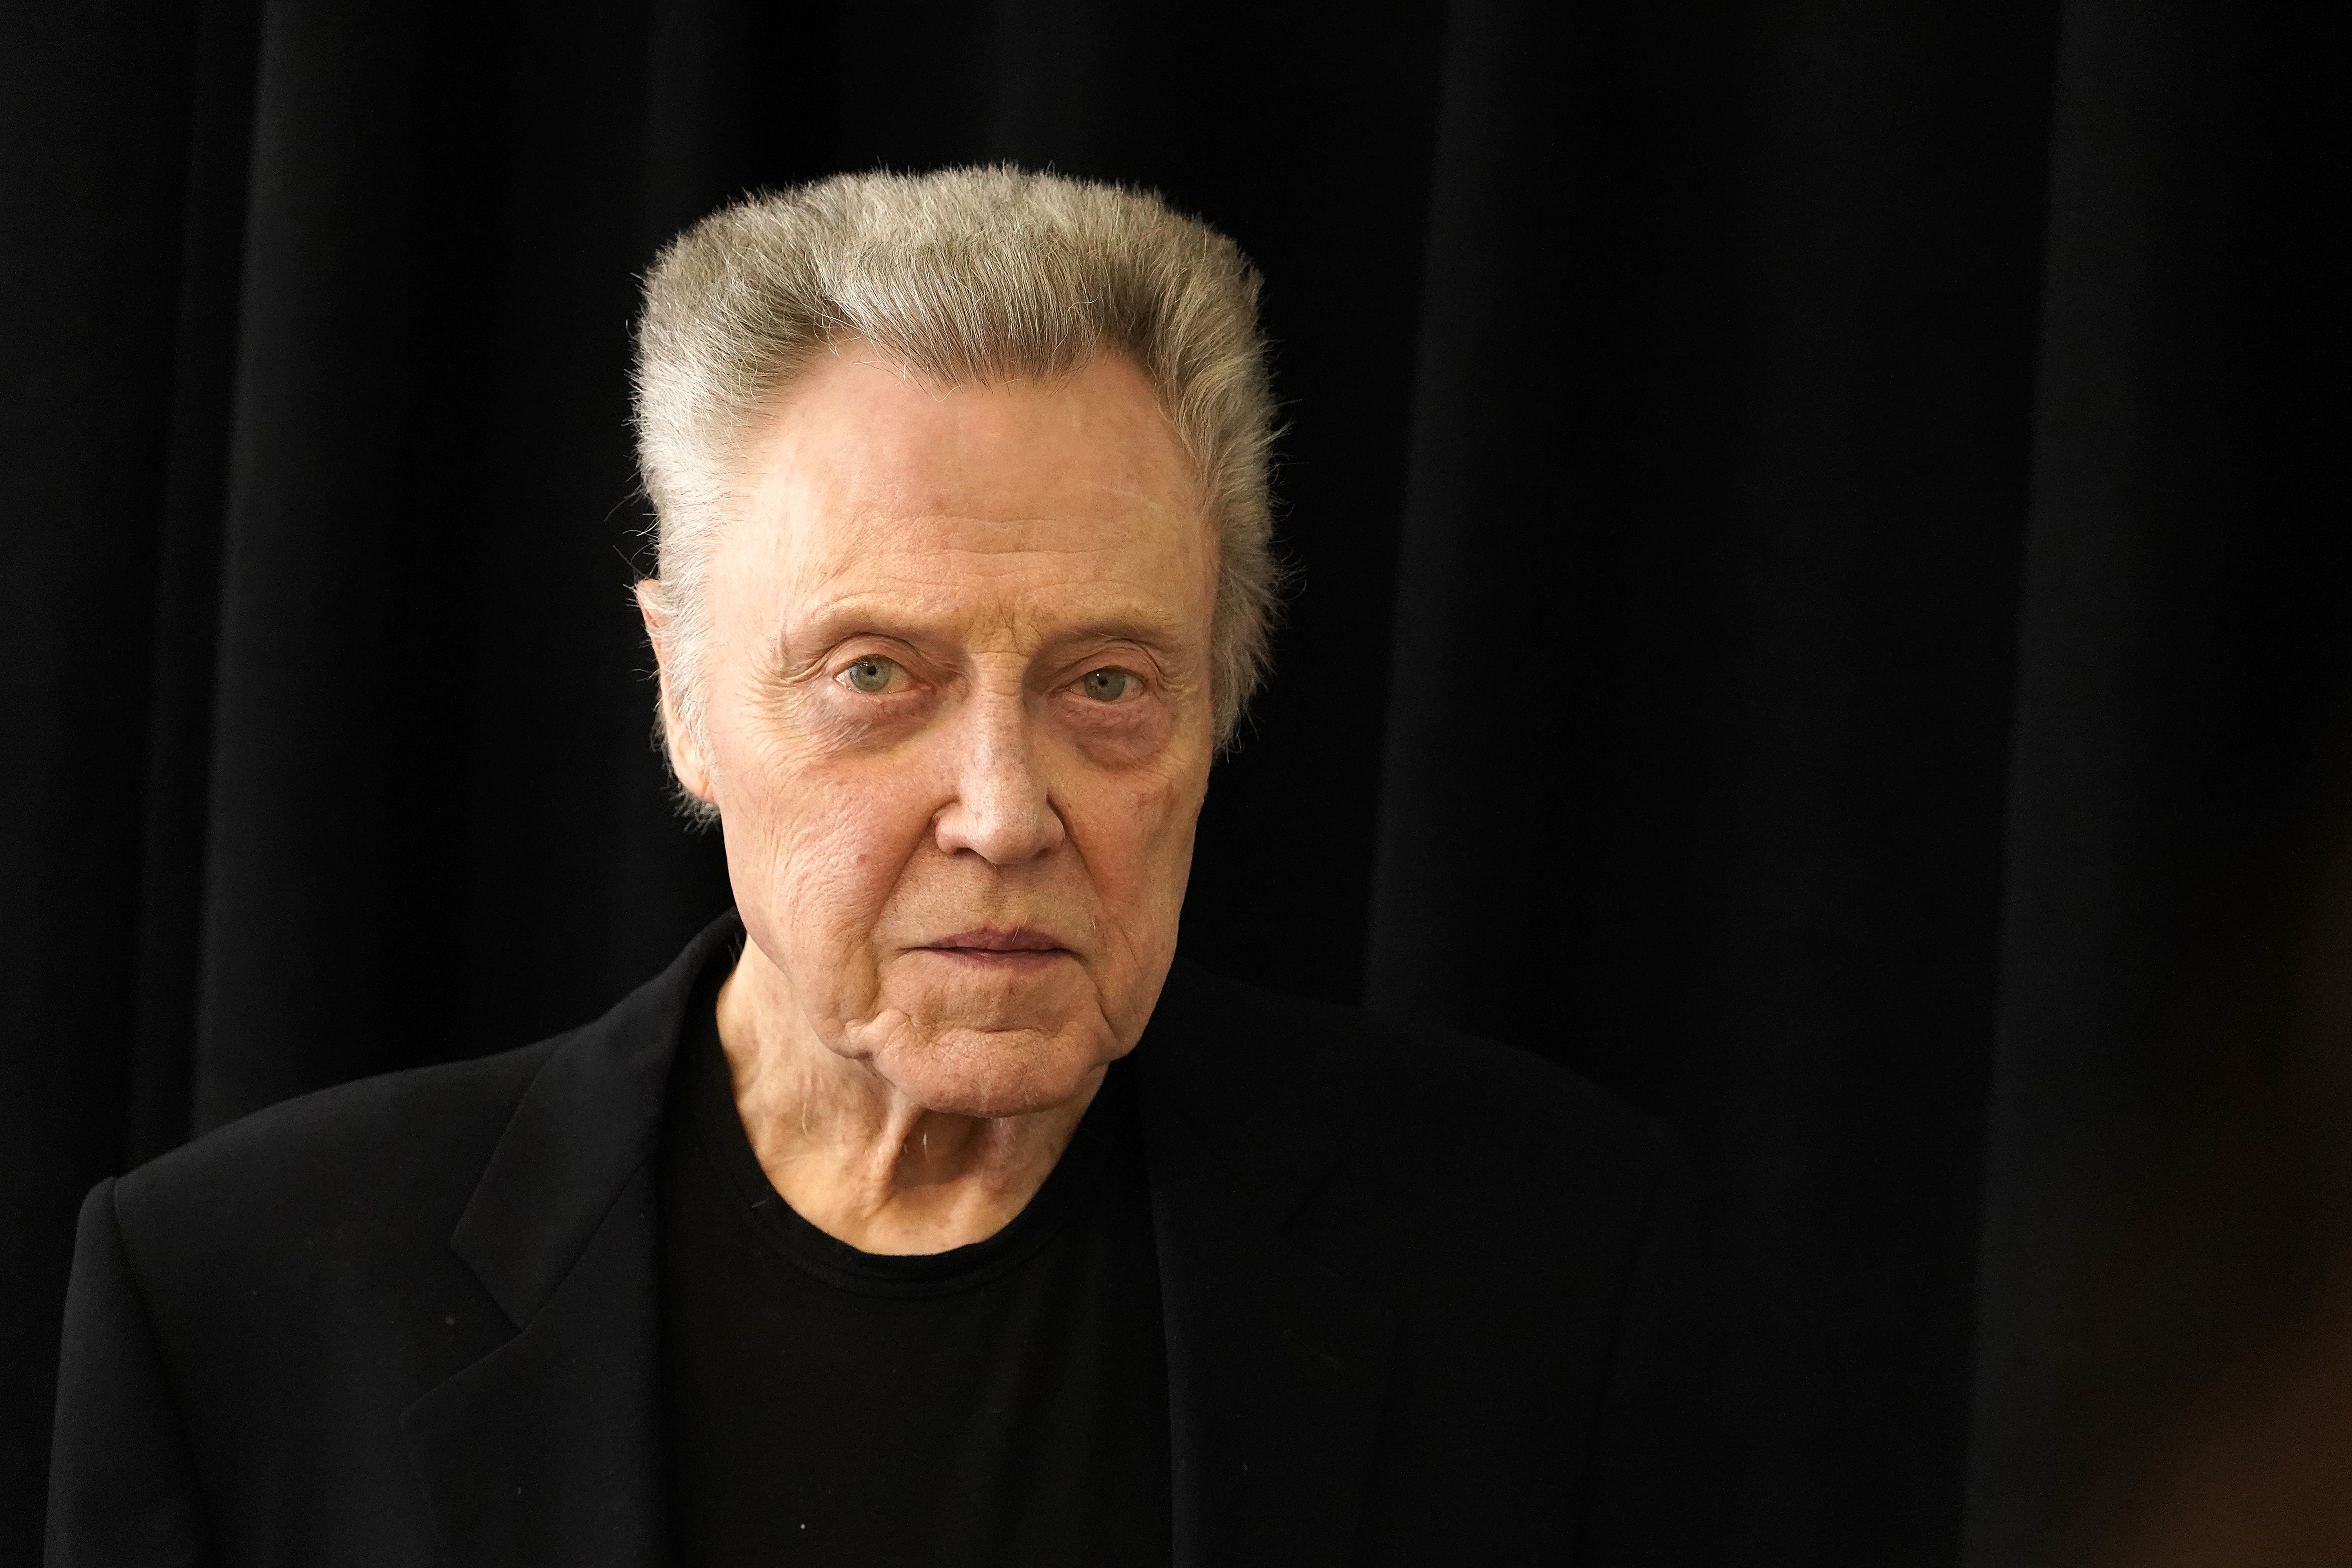 Christopher Walken attends the "The Deer Hunter" screening on June 16, 2024 in New York City. | Source: Getty Images